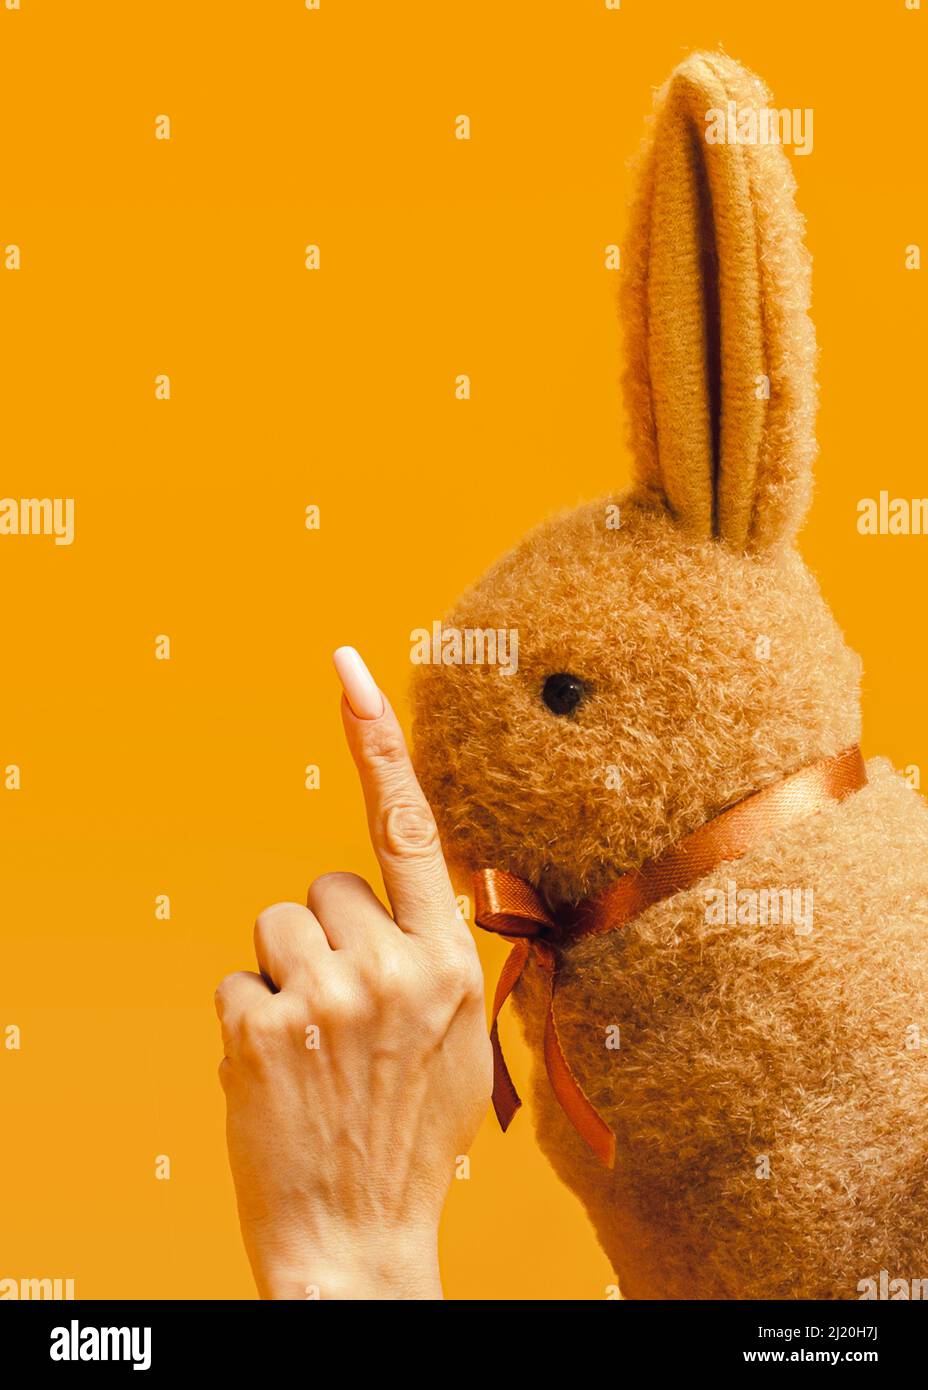 Creative Easter Minimal Concept. A woman's hand shows the rabbit to be quiet. An interesting idea on Blazing Orange background. The puffy brown bunny Stock Photo